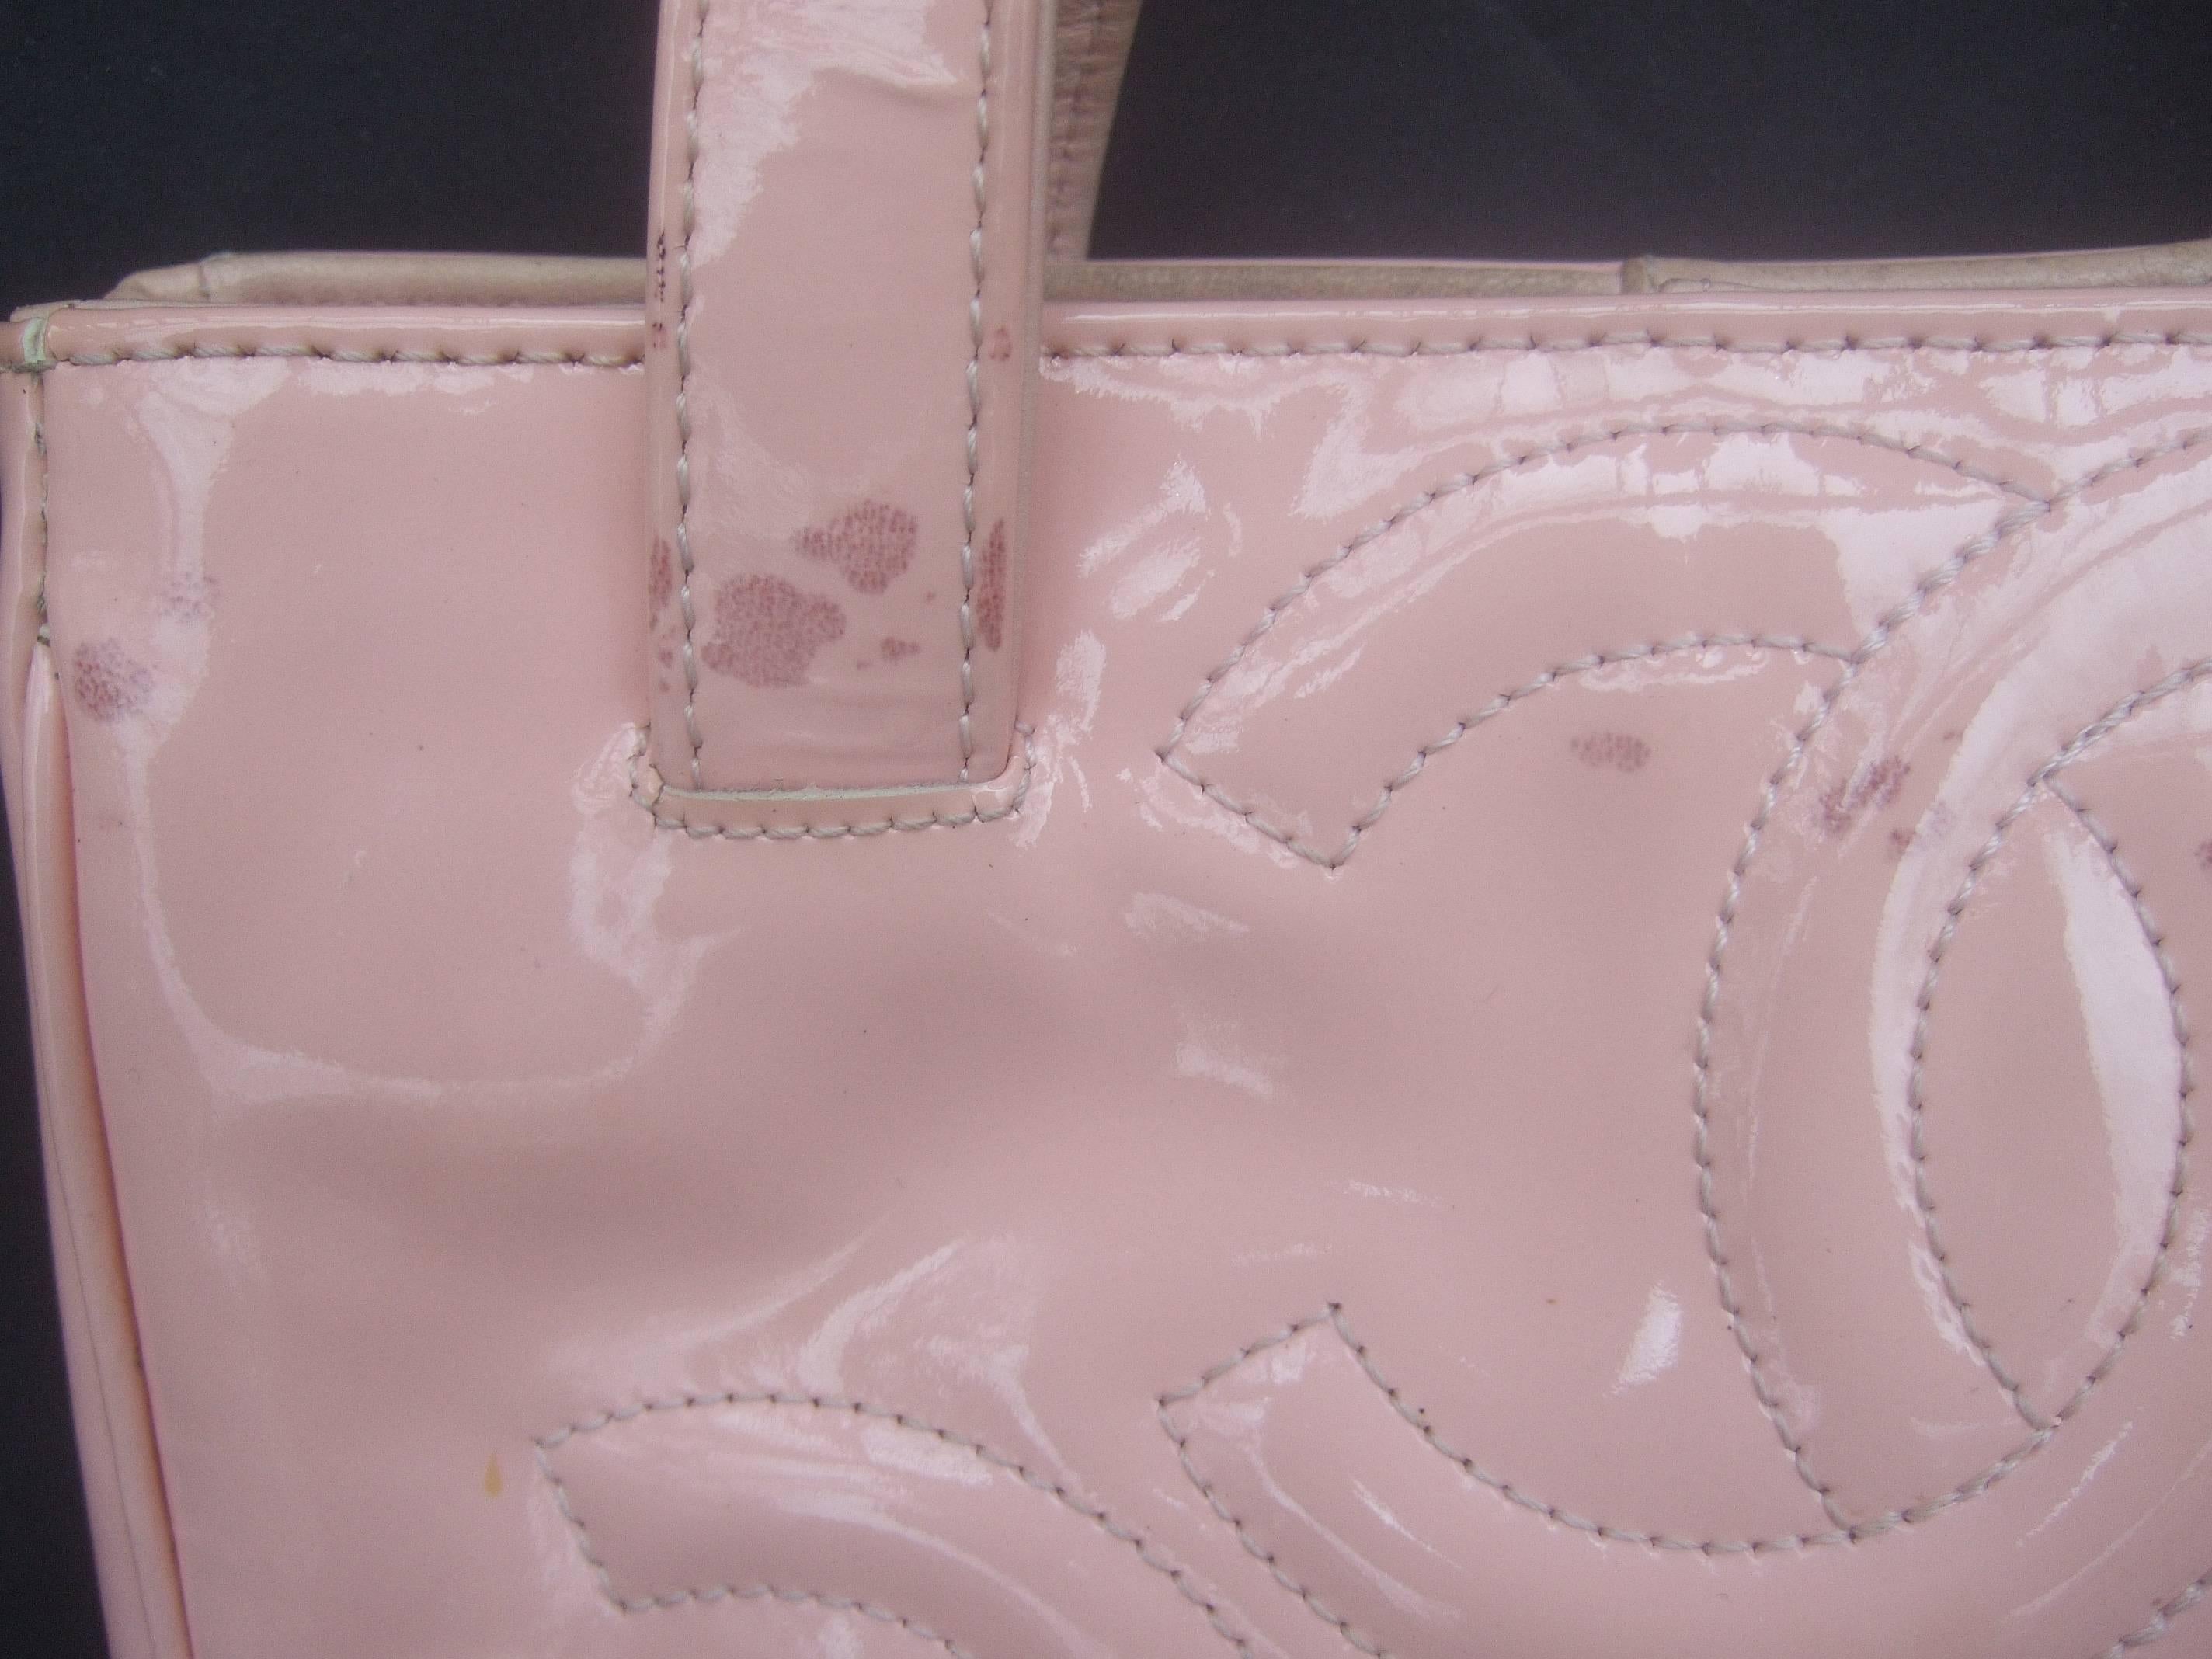 Women's Chanel Pink Patent Leather Handbag In Shabby Chic Condition 